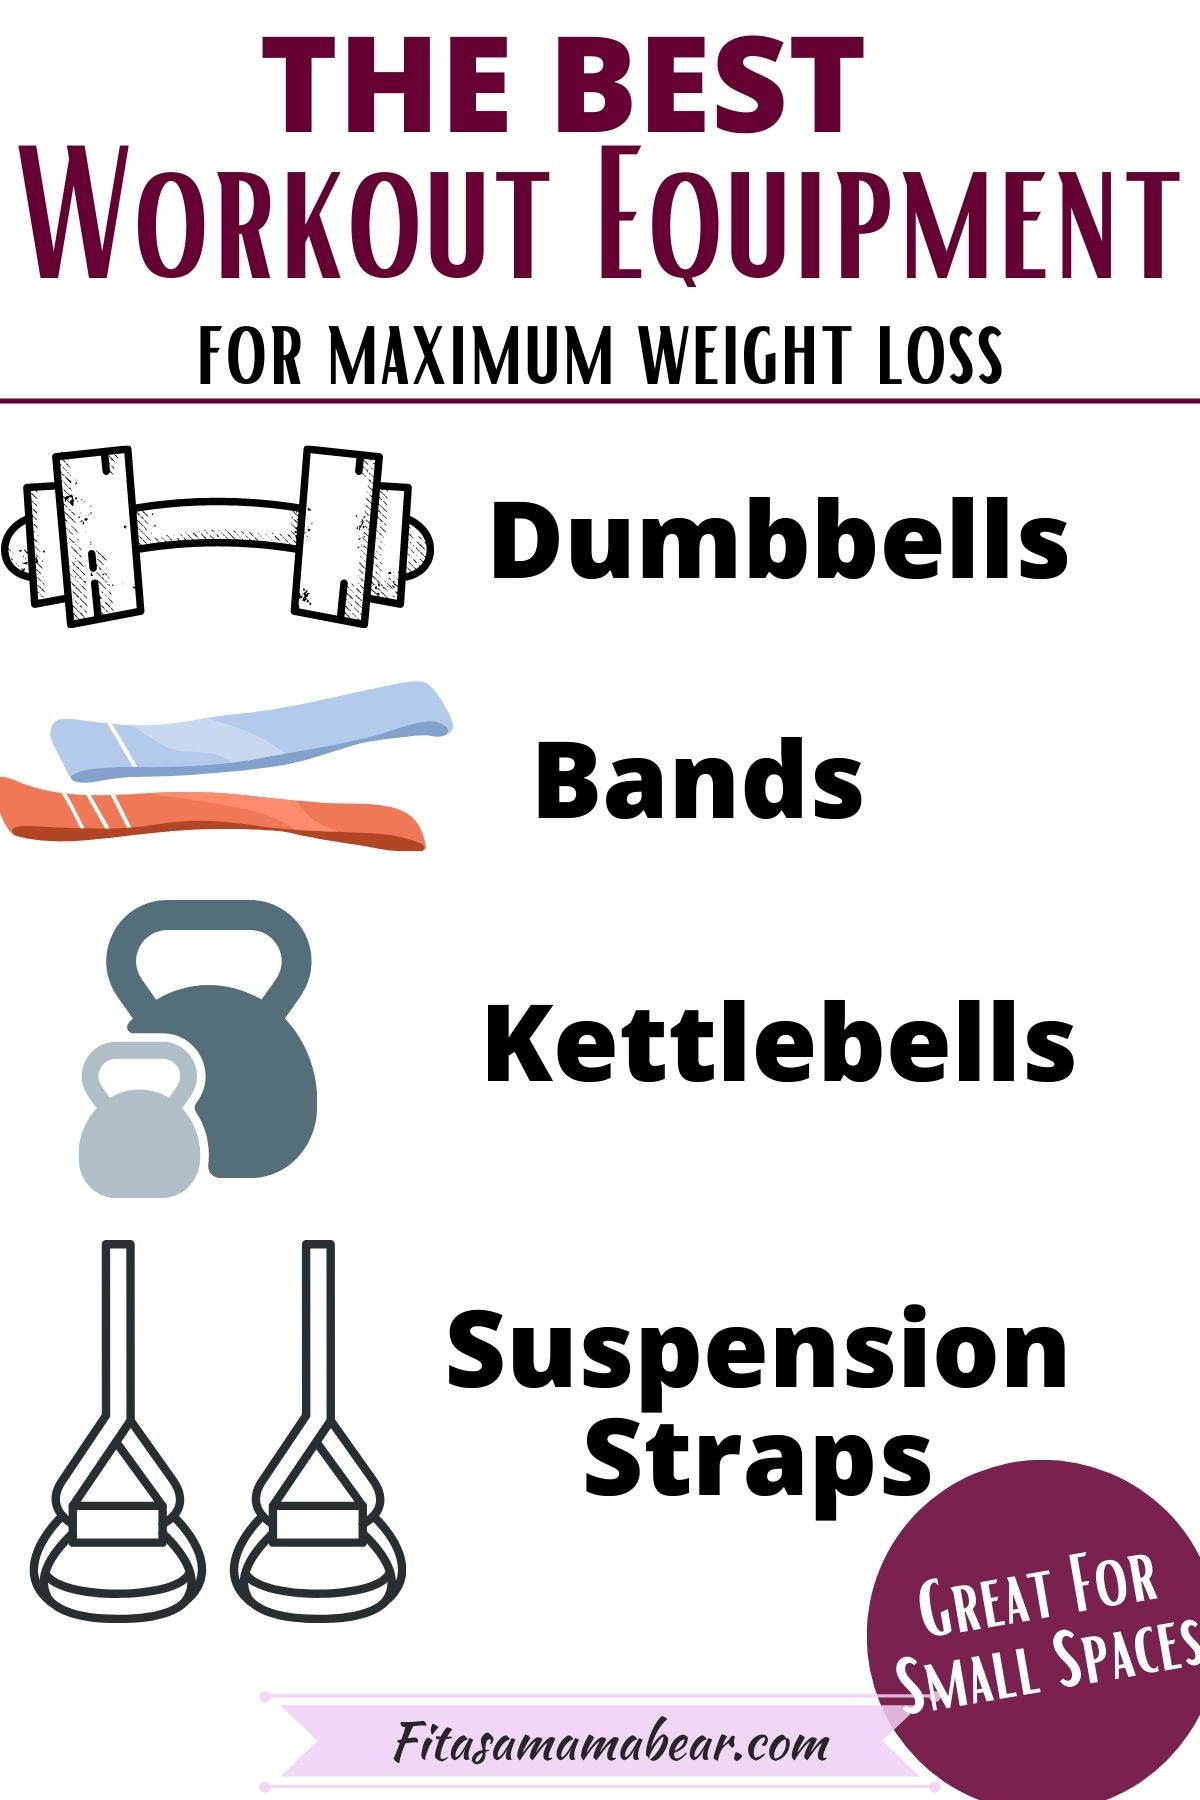 Pin image with text: multiple pieces of home workout gear like dumbbells, bands, and kettlebells with text about the best home gym equipment for weight loss